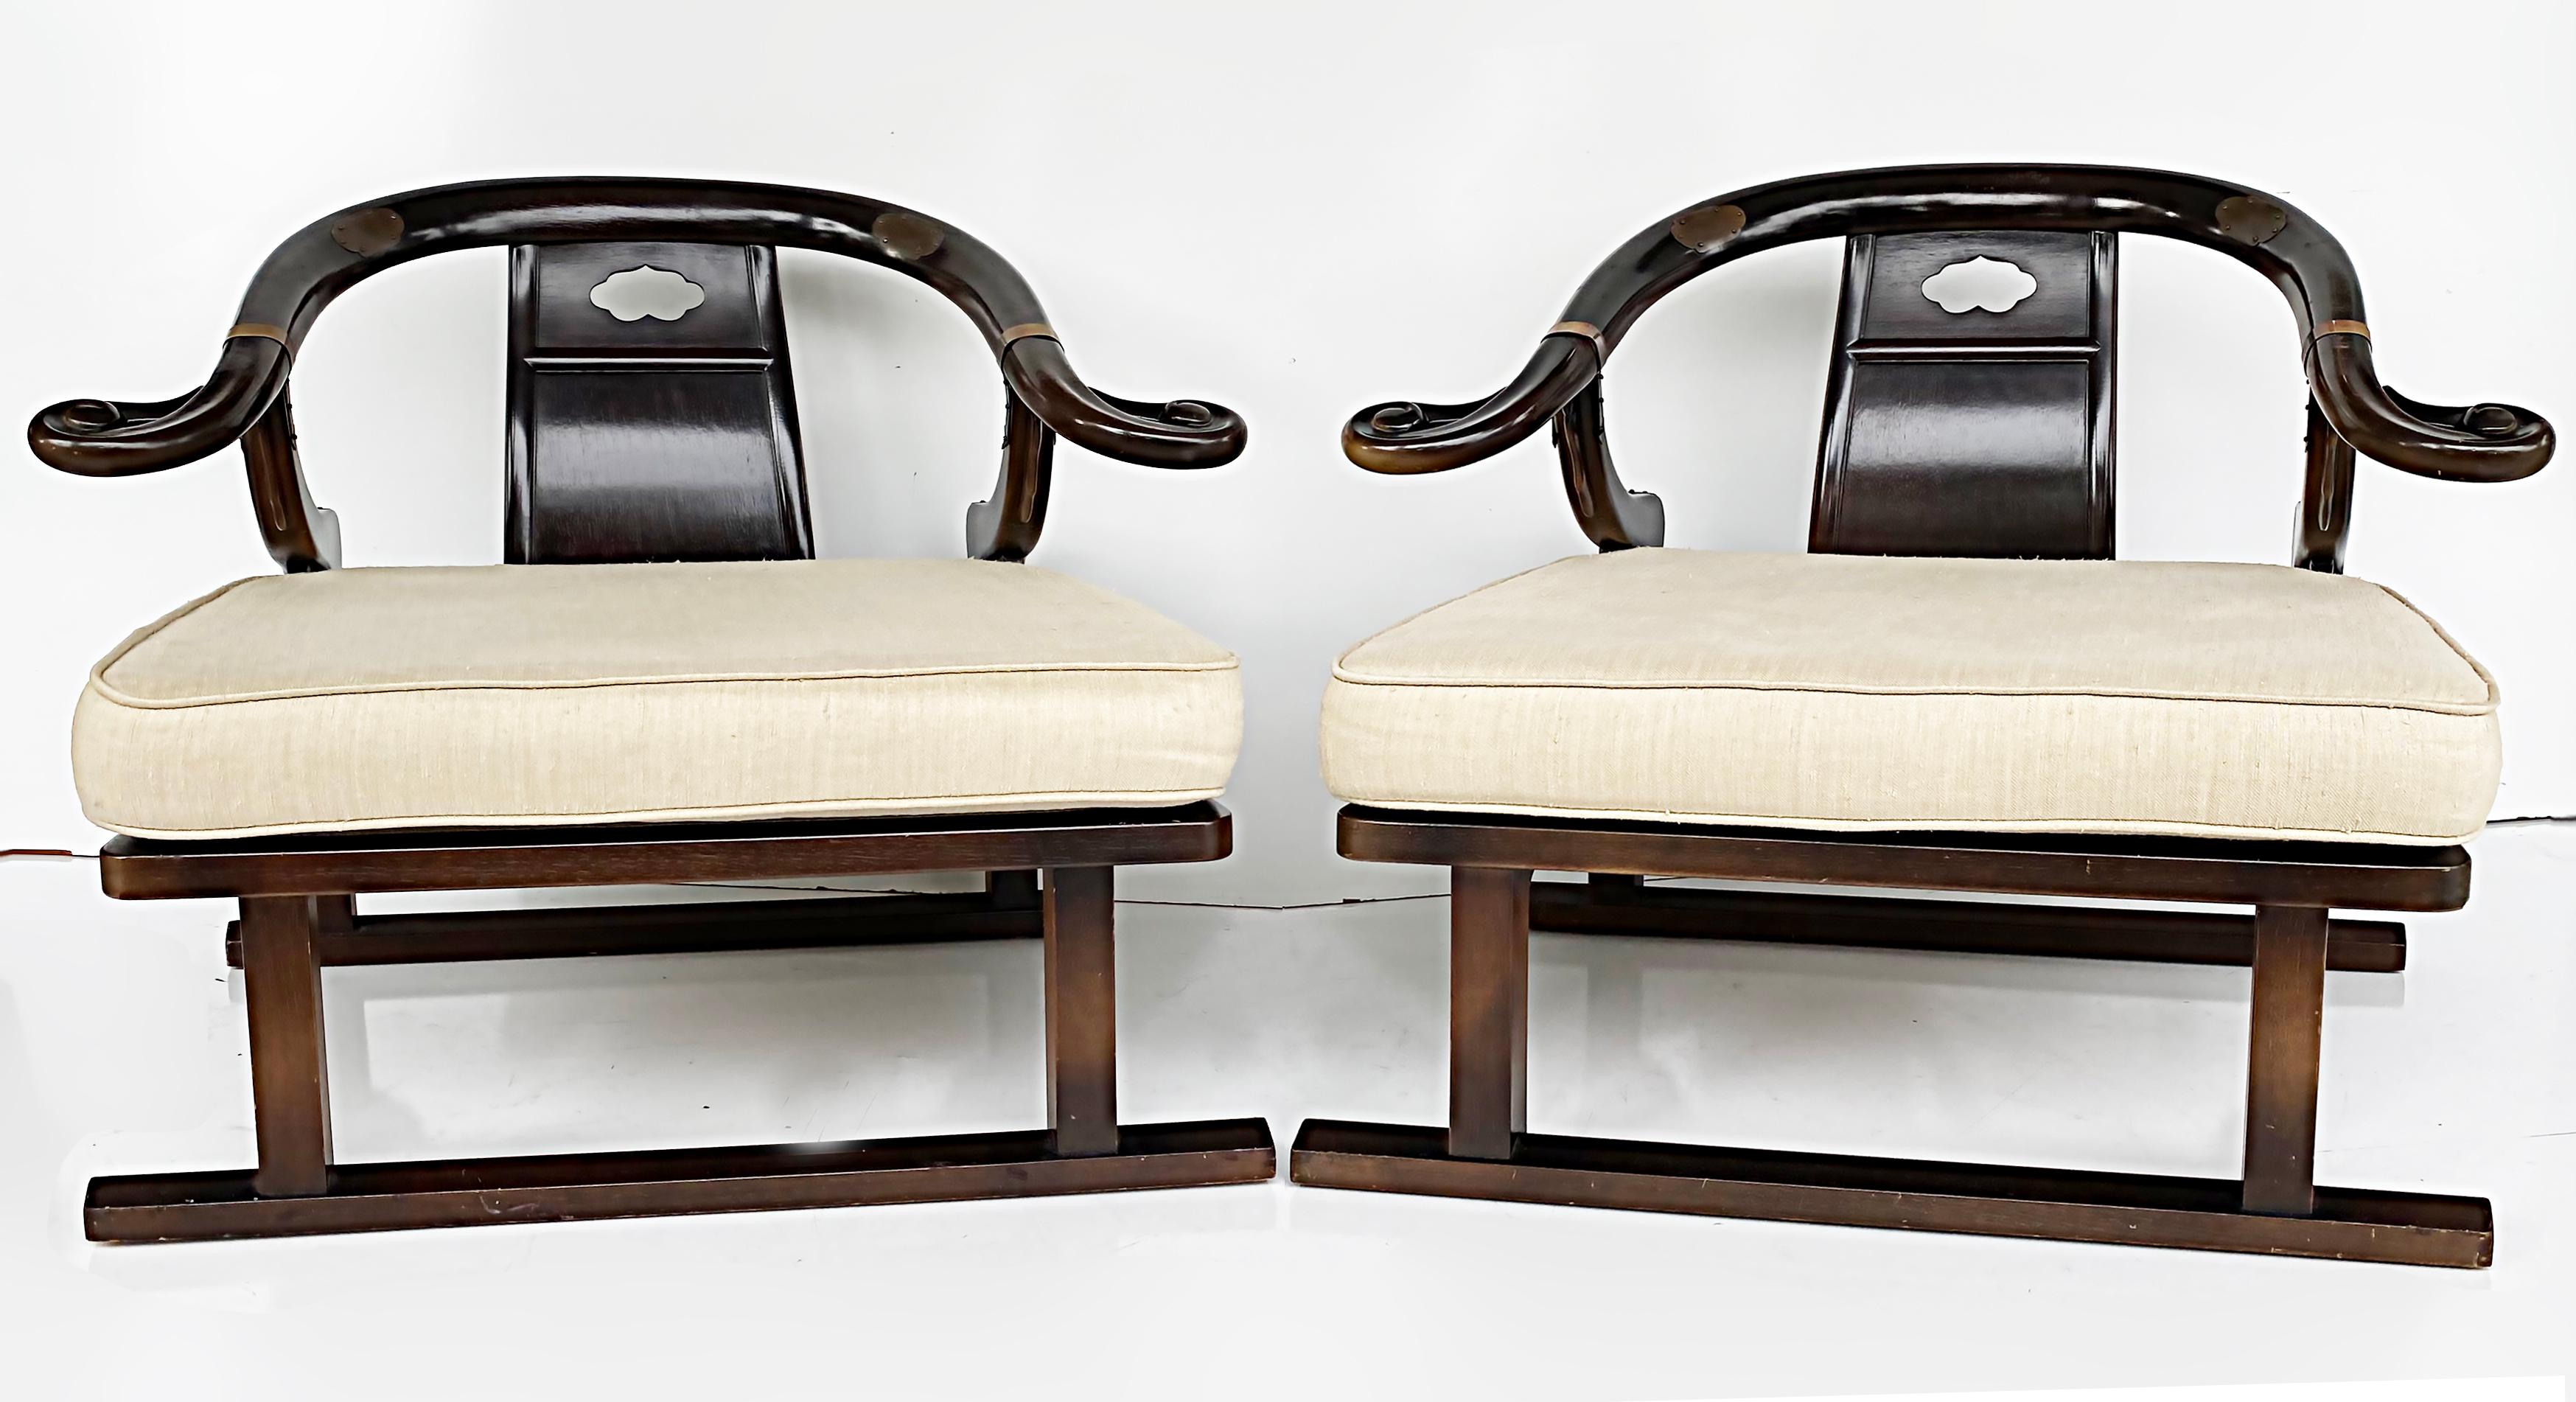 1950s Baker Michael Taylor Far East Collection Club chairs, Raw Silk Cushions

Offered for sale is a pair of Baker Furniture armchairs from the Far East collection designed by Michael Taylor in the 1950s. These Asian inspired horseshoe style